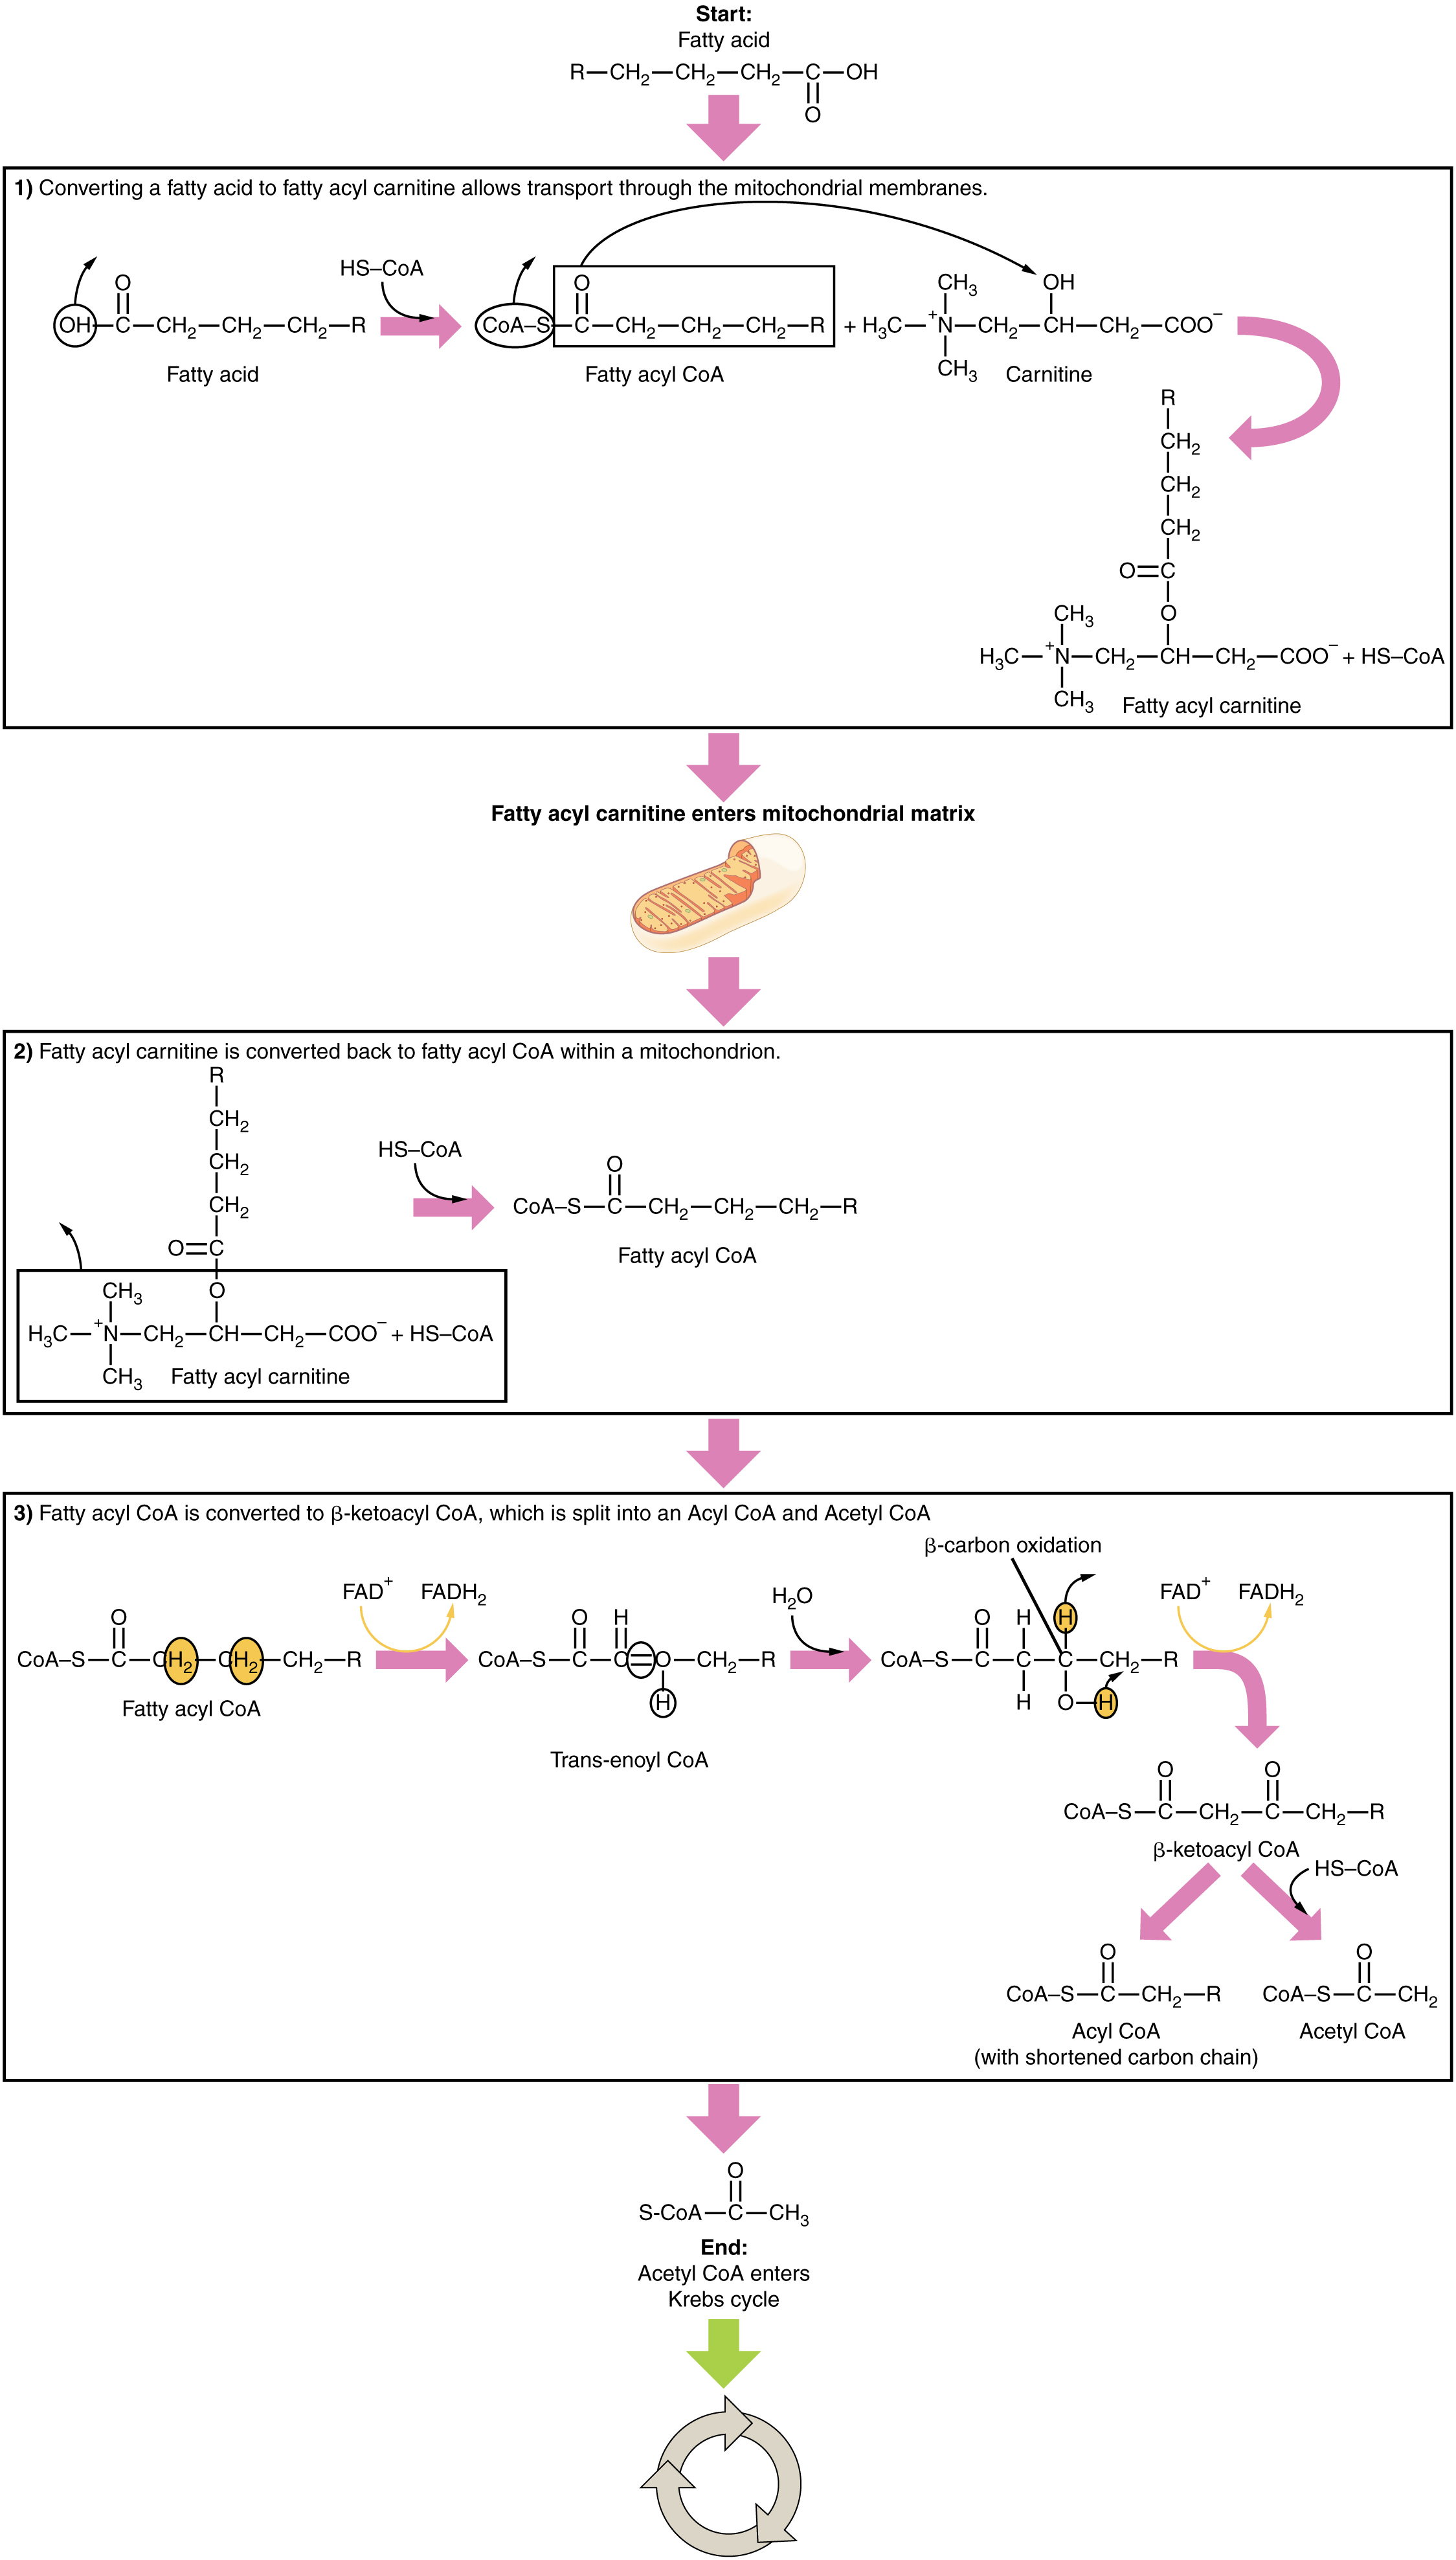 This figure shows the reactions that break down fatty acids. The top panel shows the conversion of fatty acids into carnitine. The bottom panel shows the conversion of carnitine into acetyl-CoA.